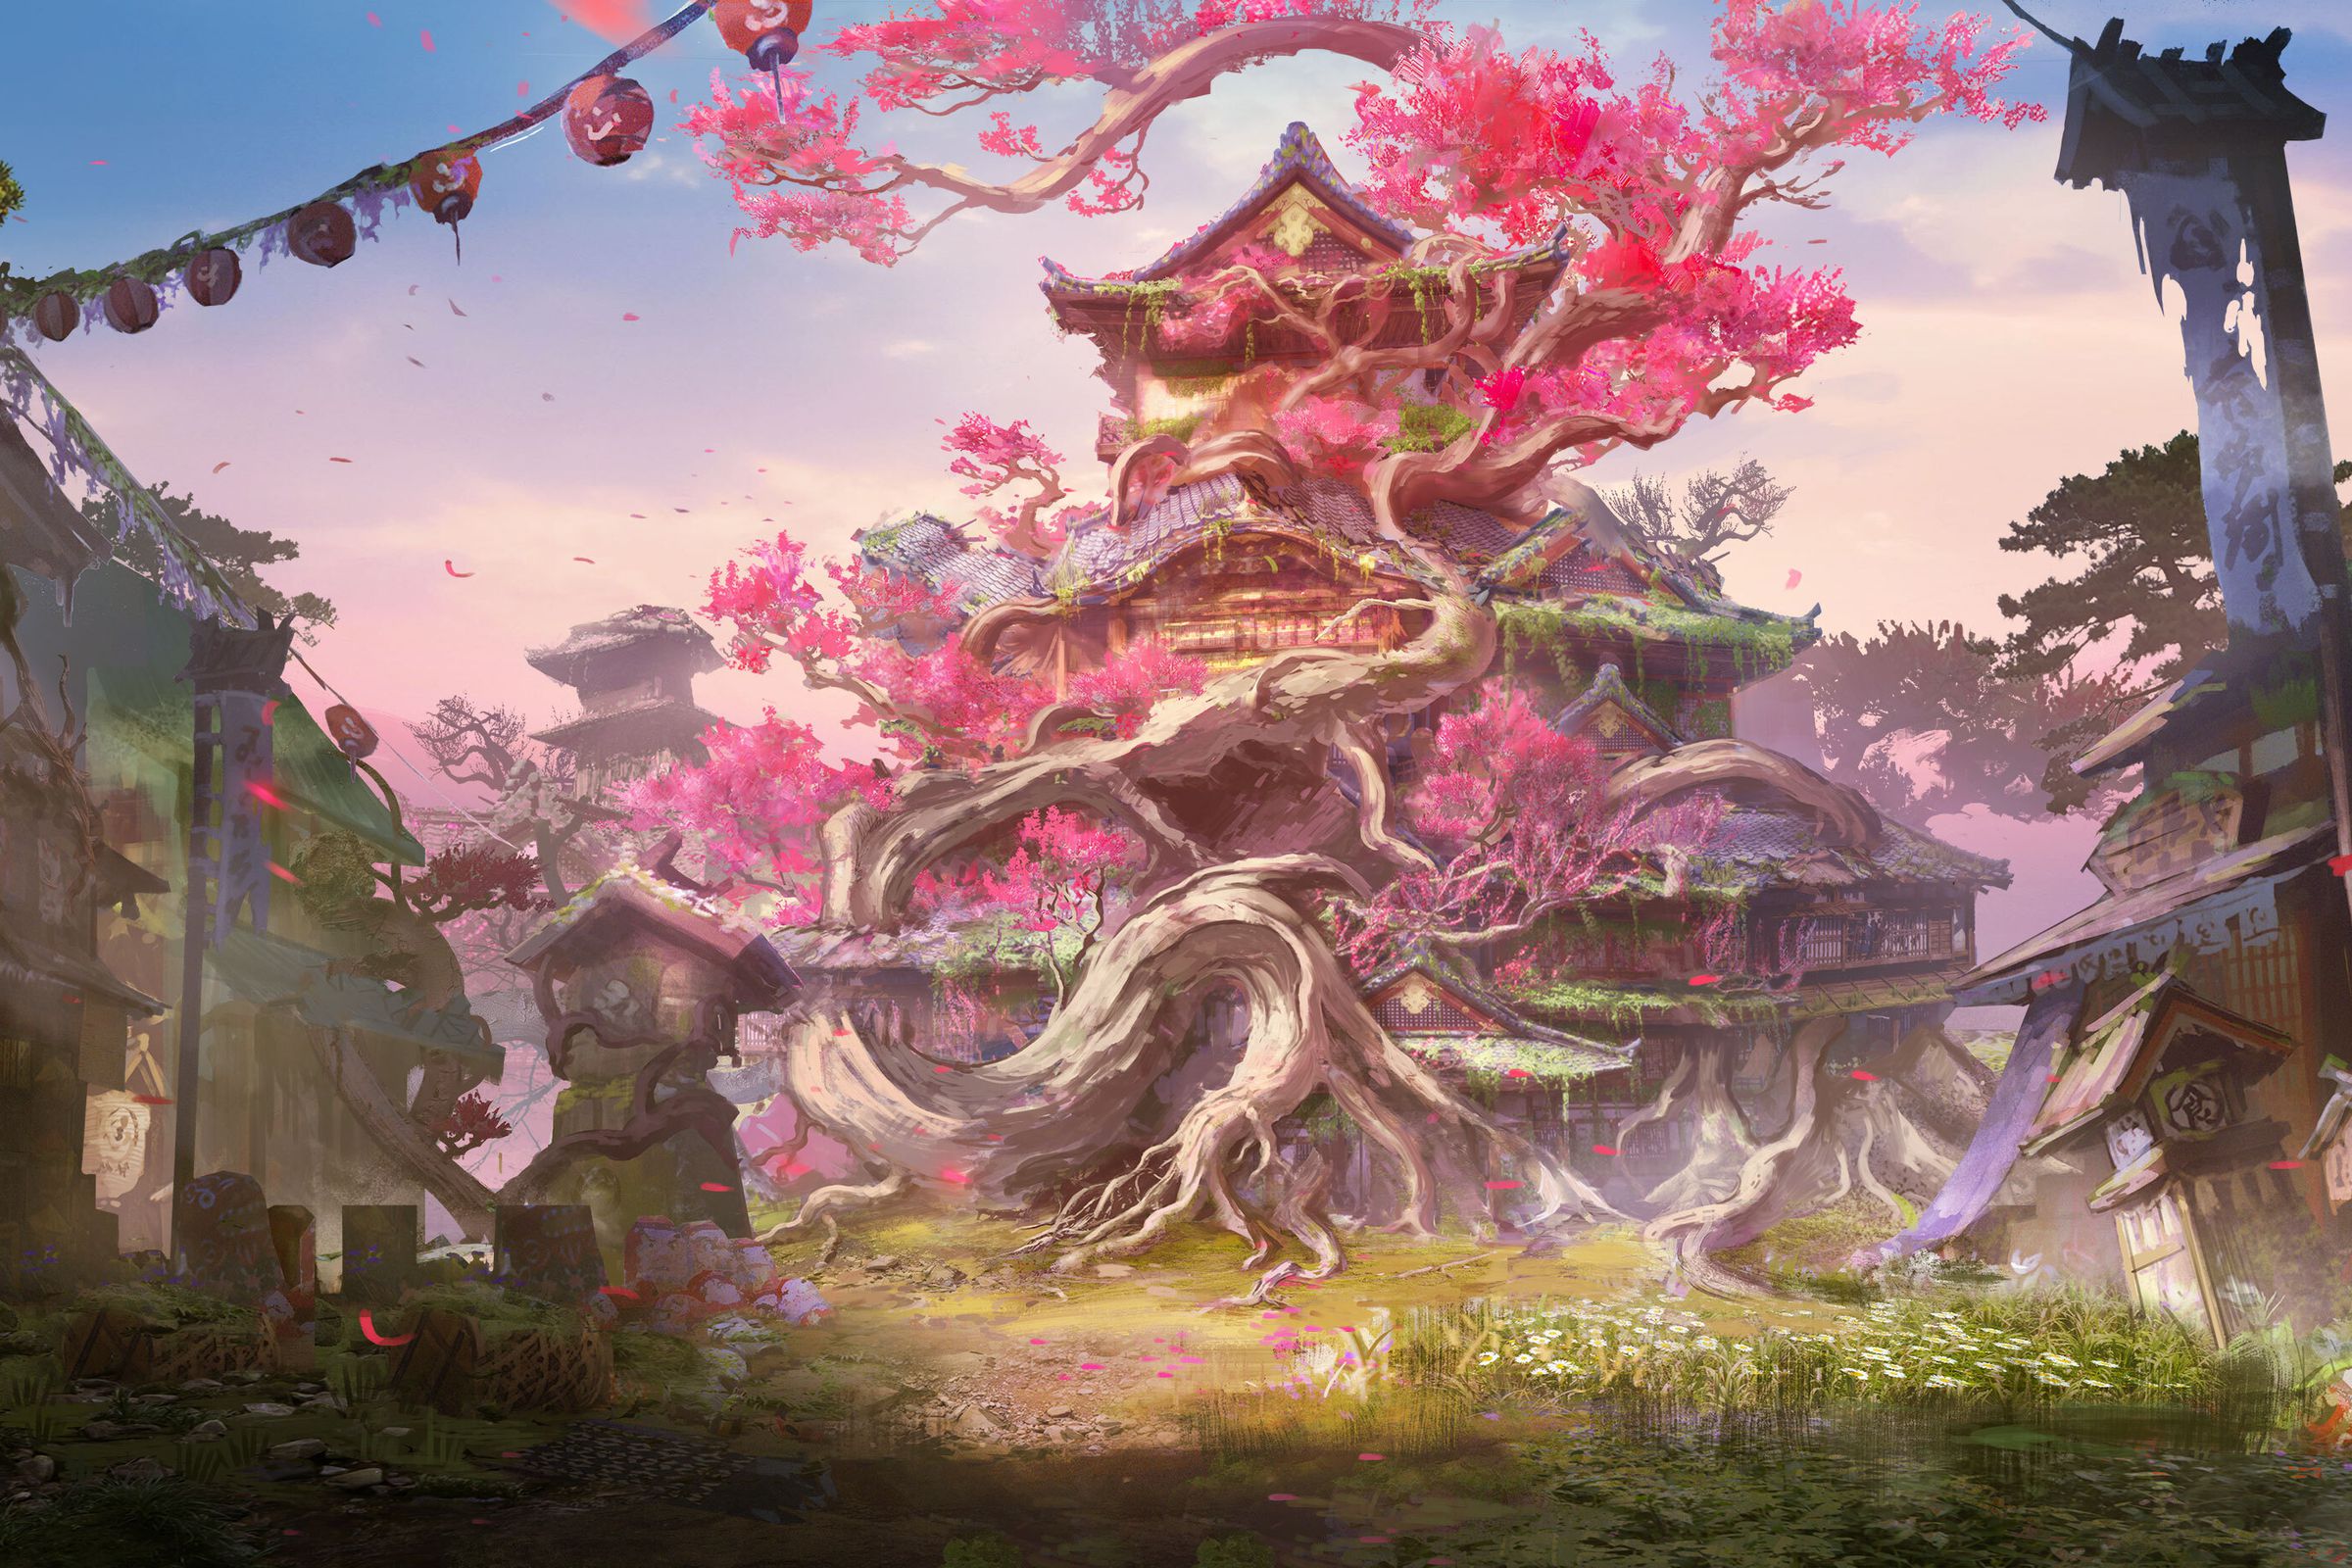 This is a piece of concept art from EA and Koei Tecmo’s new “hunting game.” In the middle of the image, a tall tree with pink leaves winds through a large building with Japanese-inspired architecture. On the sides of the image, there are other buildings and trees.